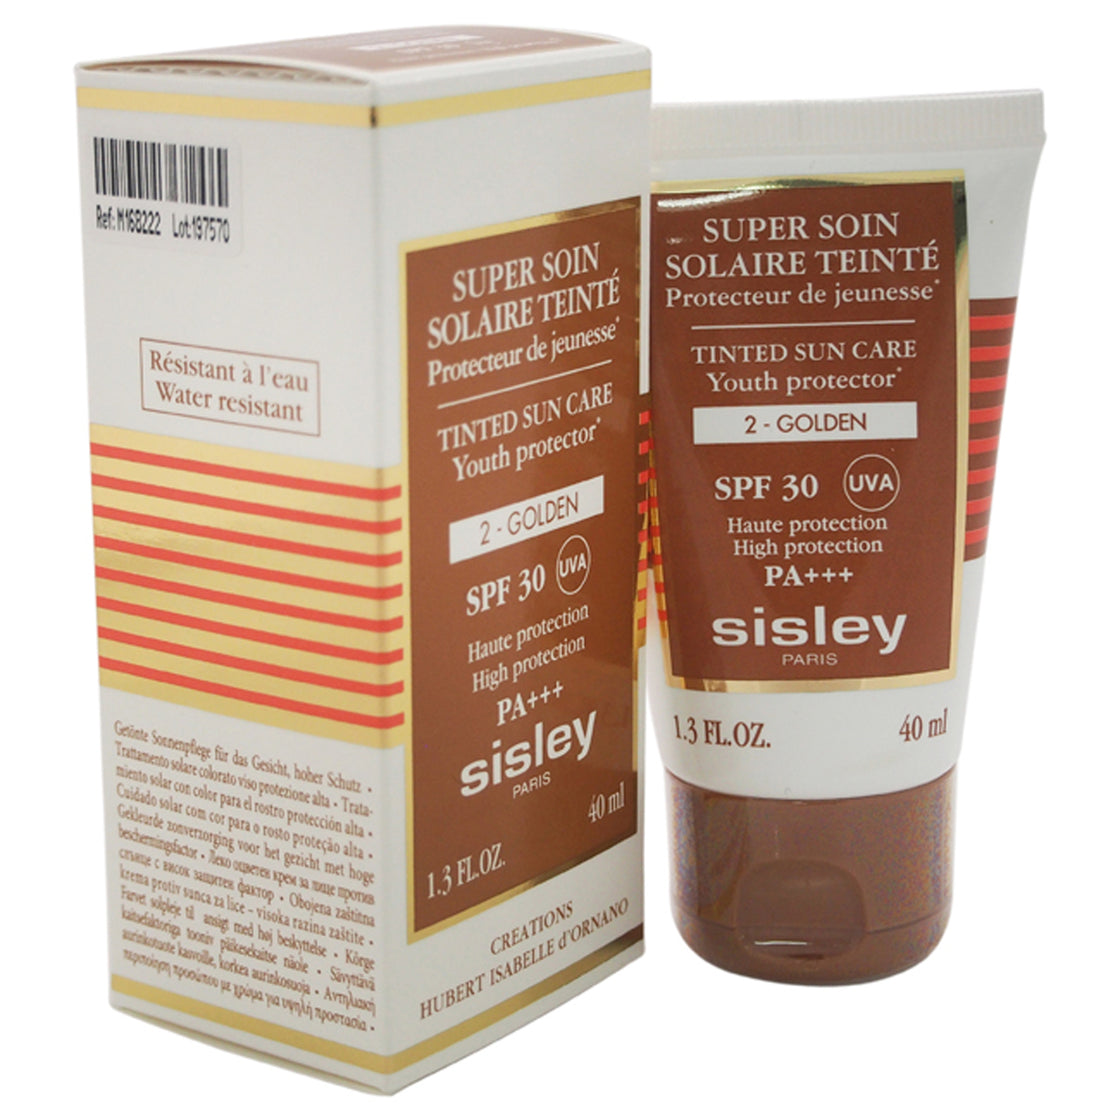 Super Soin Solaire Tinted Sun Care SPF 30 - 2 Golden by Sisley for Women - 1.3 oz Sun Care